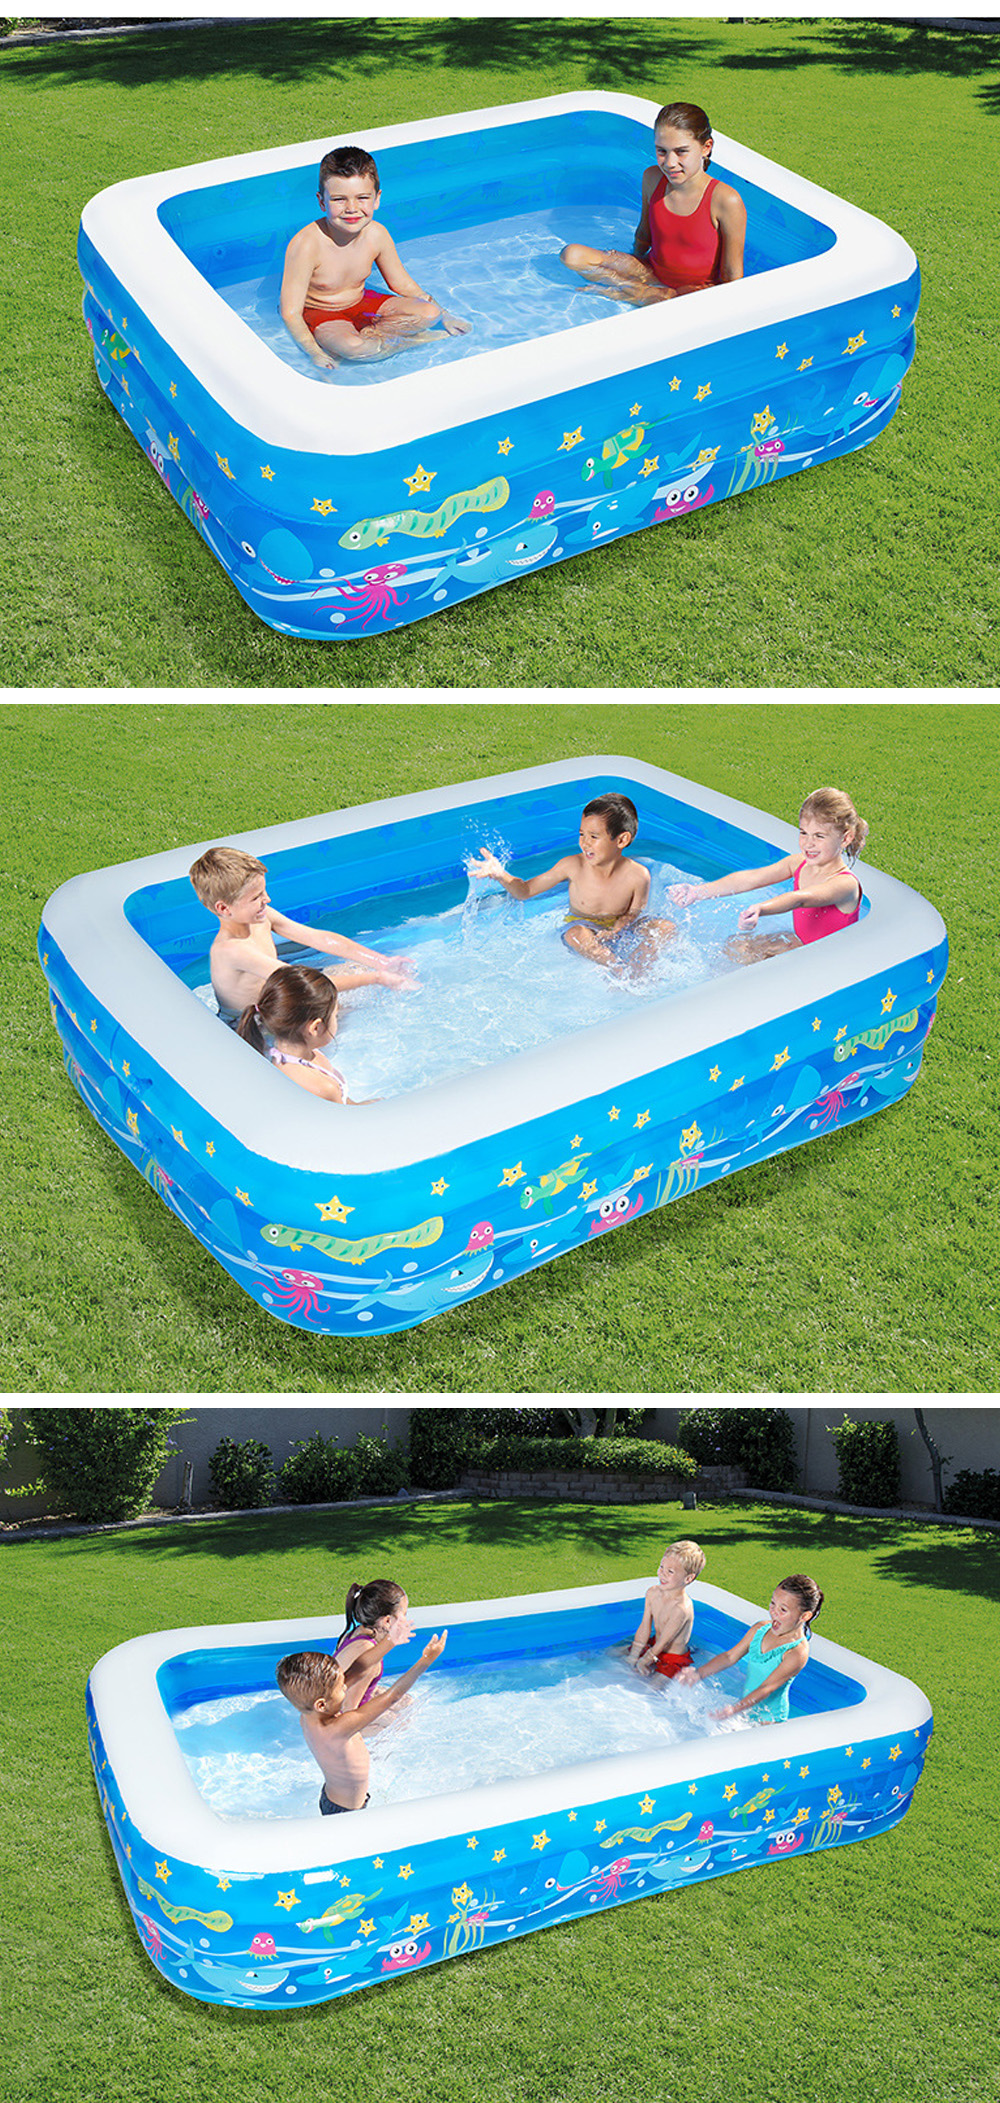 Inflatable-Swimming-Pool-Kids-Adult-Yard-Garden-Family-Party-Outdoor-Indoor-Playing-Inflatable-Batht-1674131-3